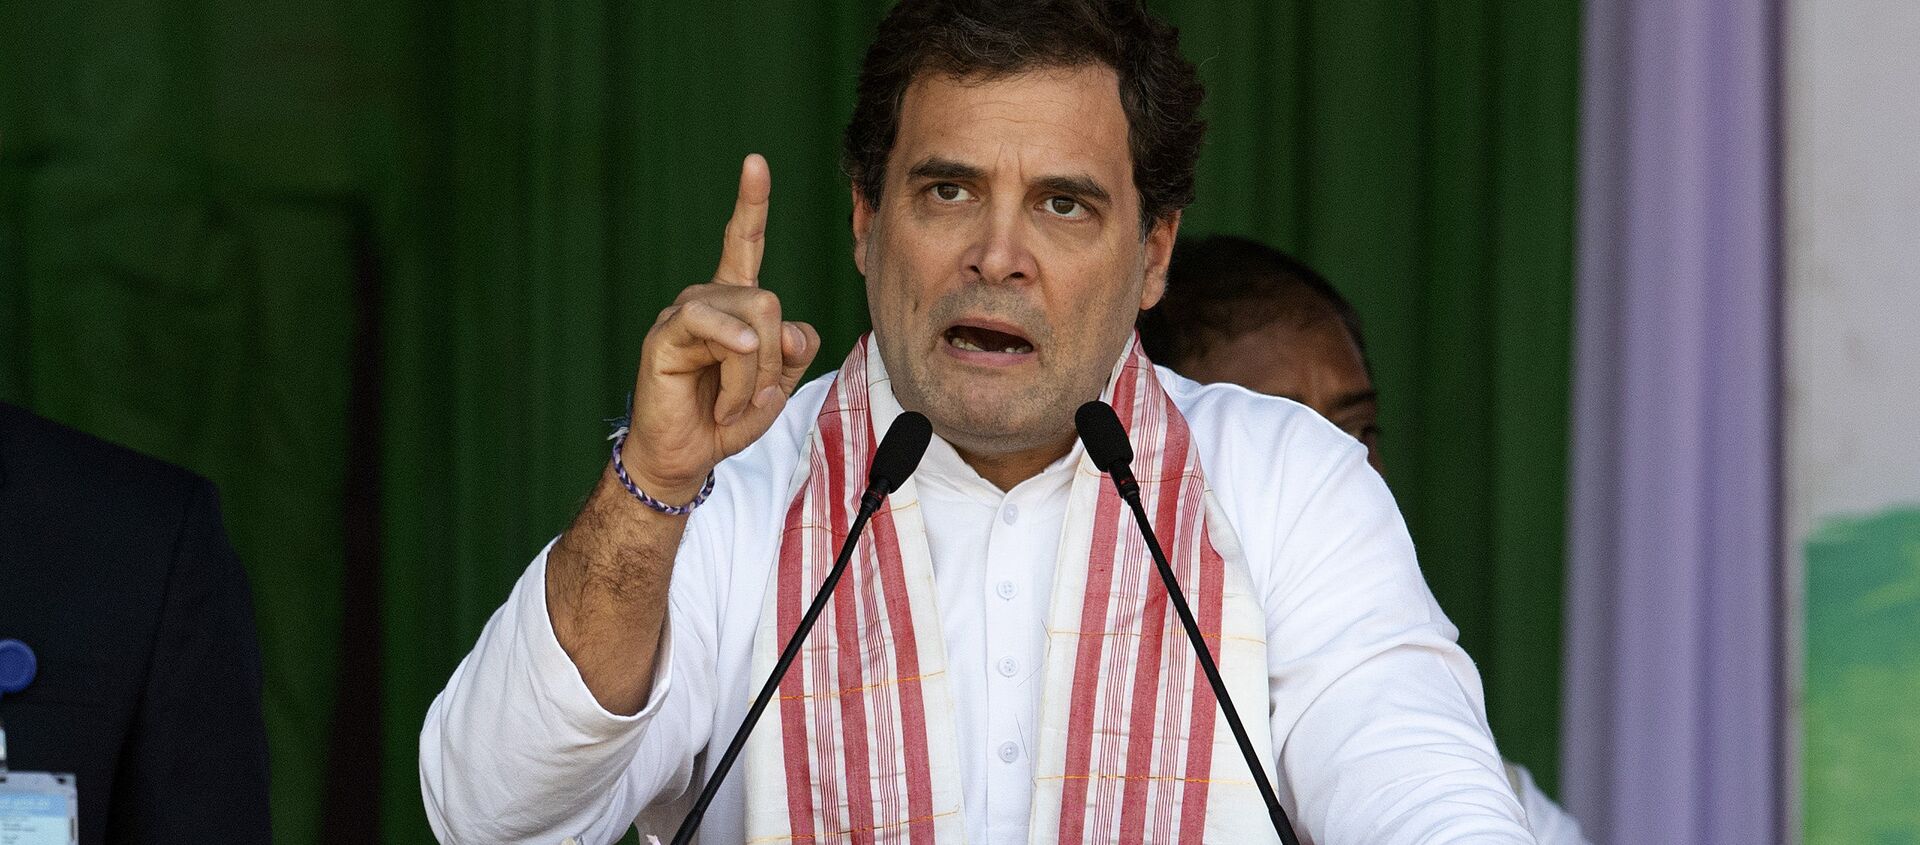 India's opposition Congress party leader Rahul Gandhi speaks at a rally against the Citizenship Amendment Act in Gauhati, India, Saturday, 28 December 2019 - Sputnik International, 1920, 23.04.2021